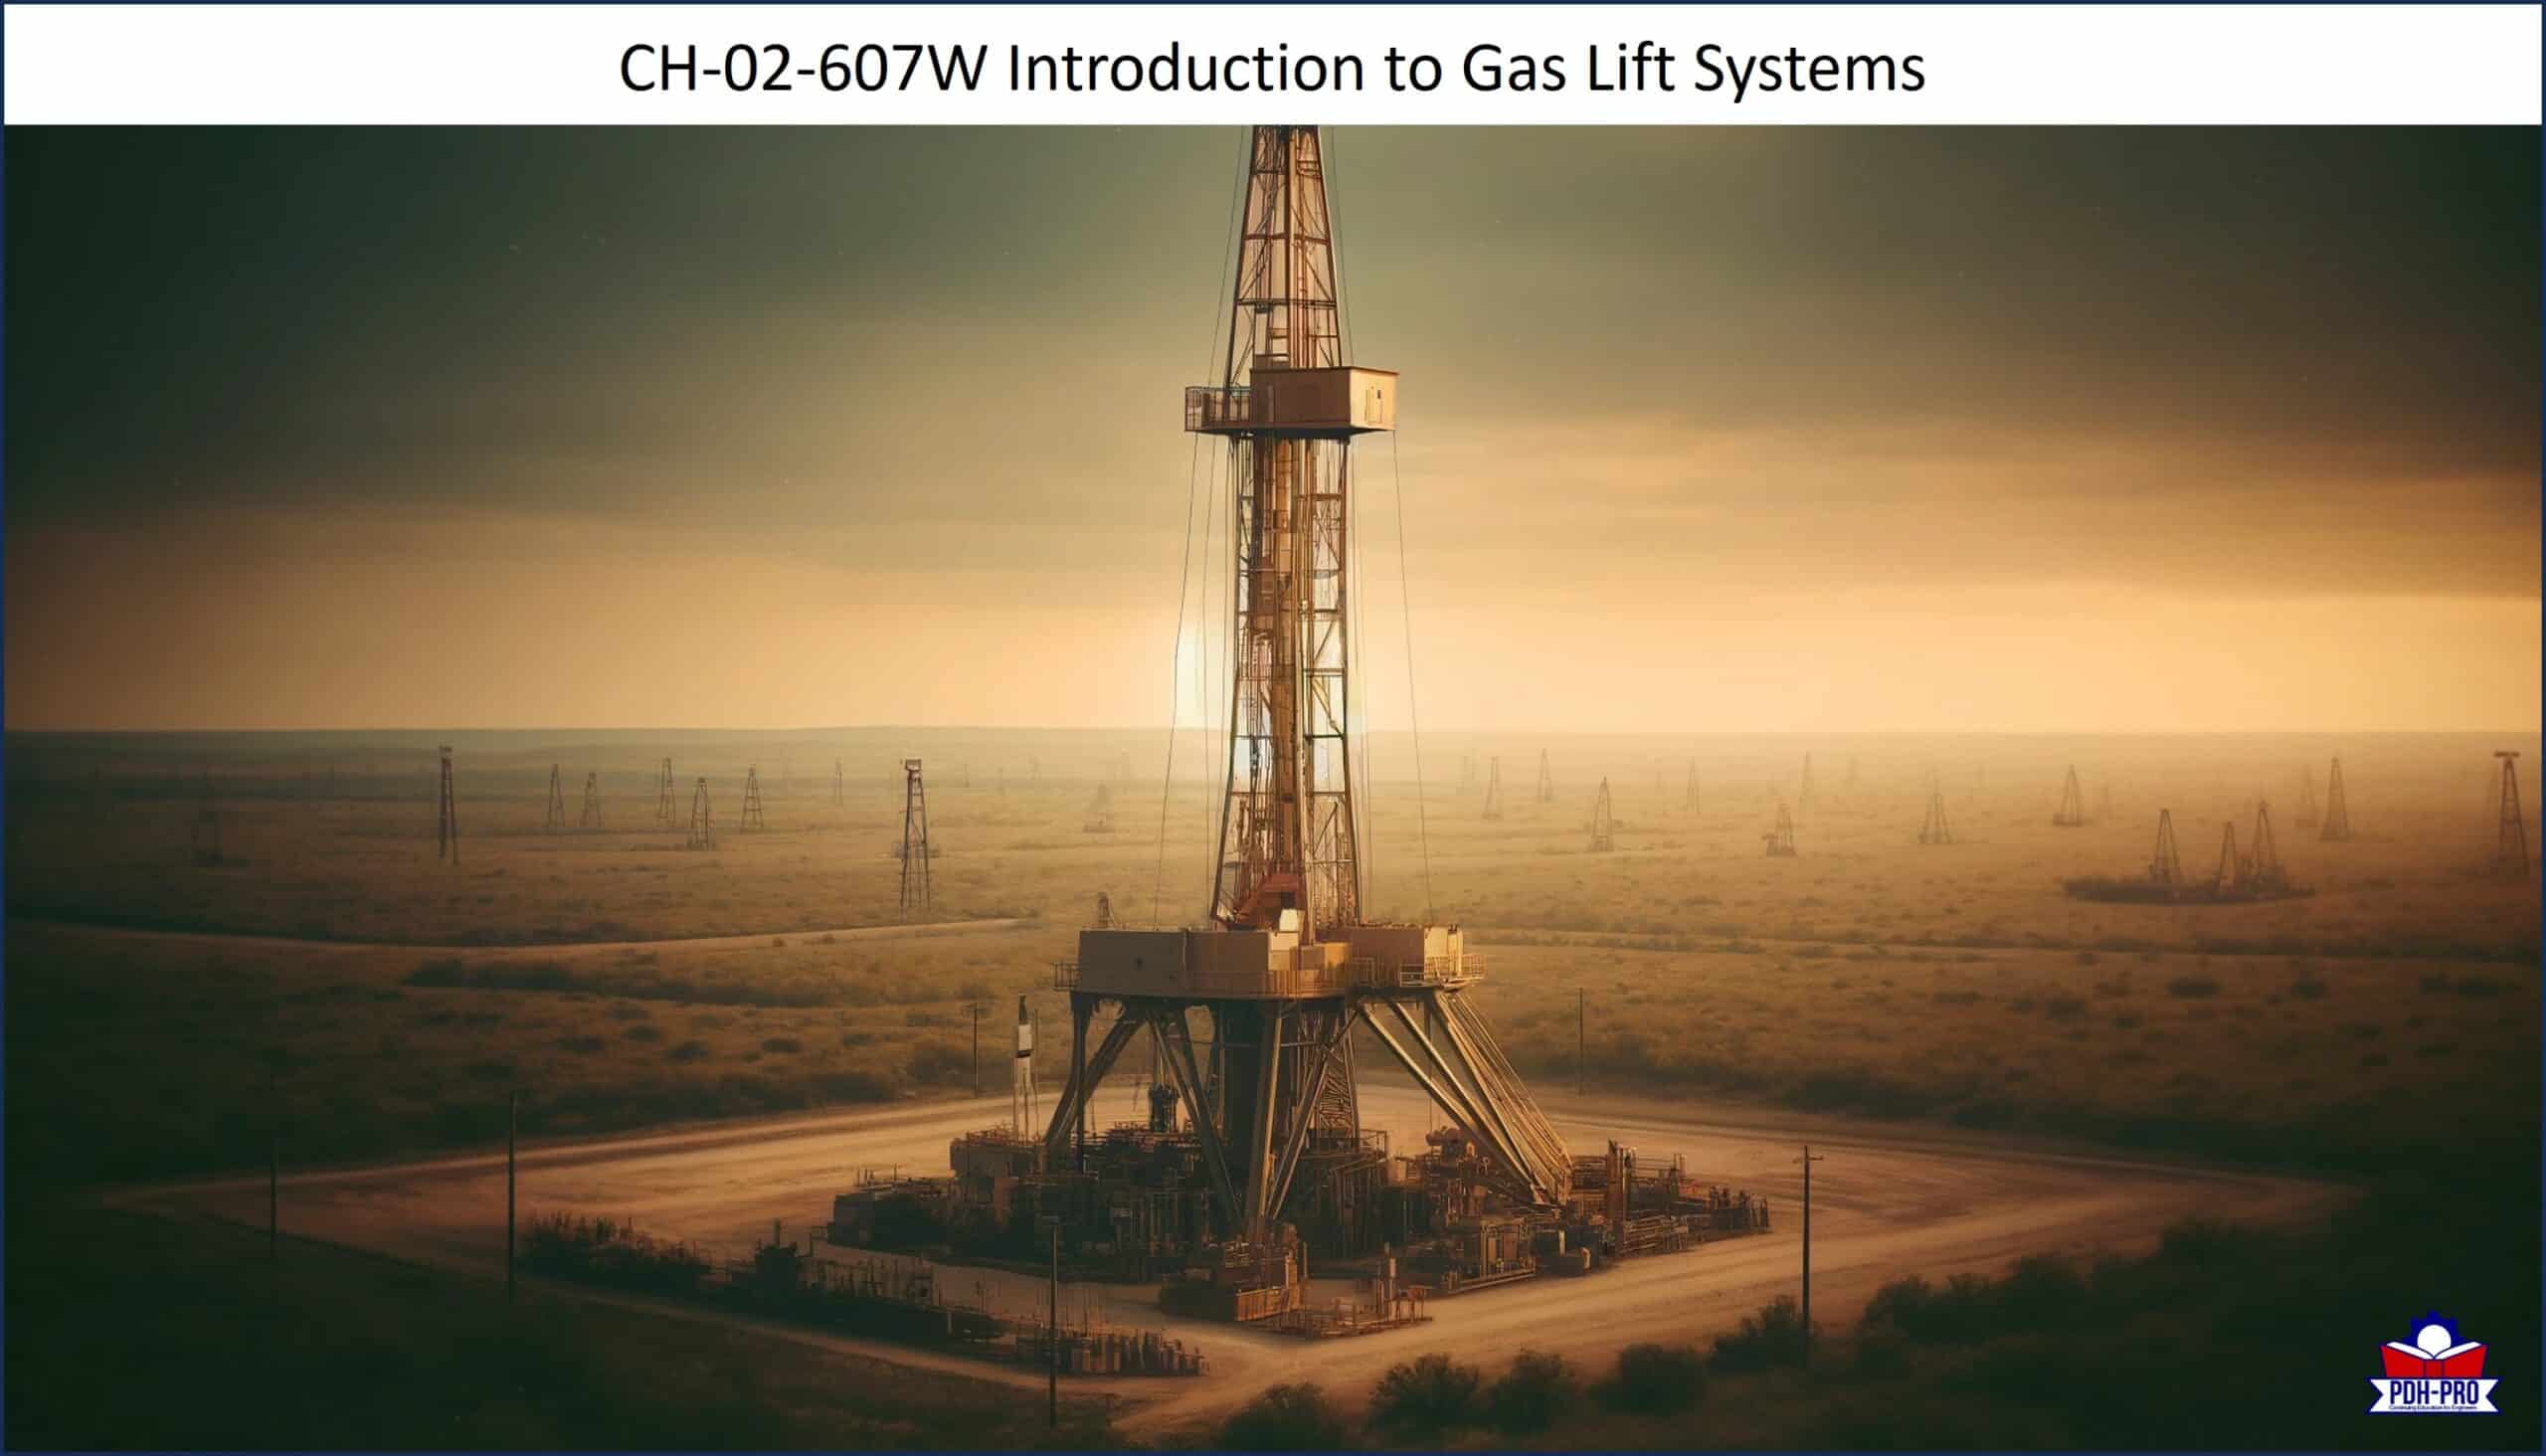 Introduction to Gas Lift Systems